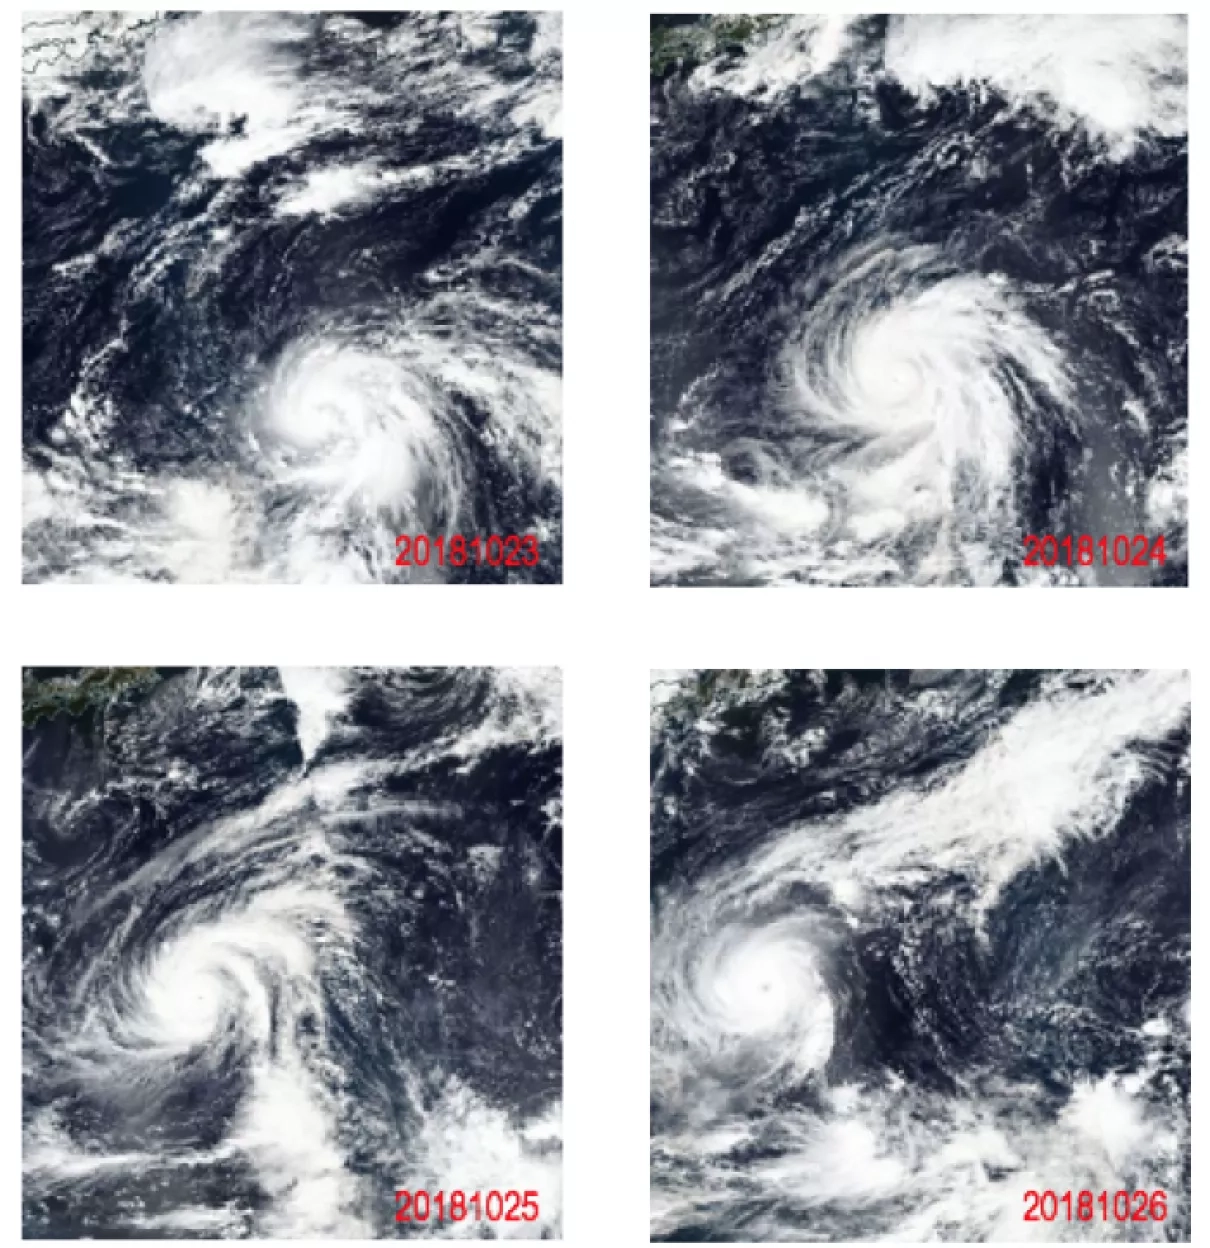 Image of remote sensing observations of Typhoon Yutu from VIIRS